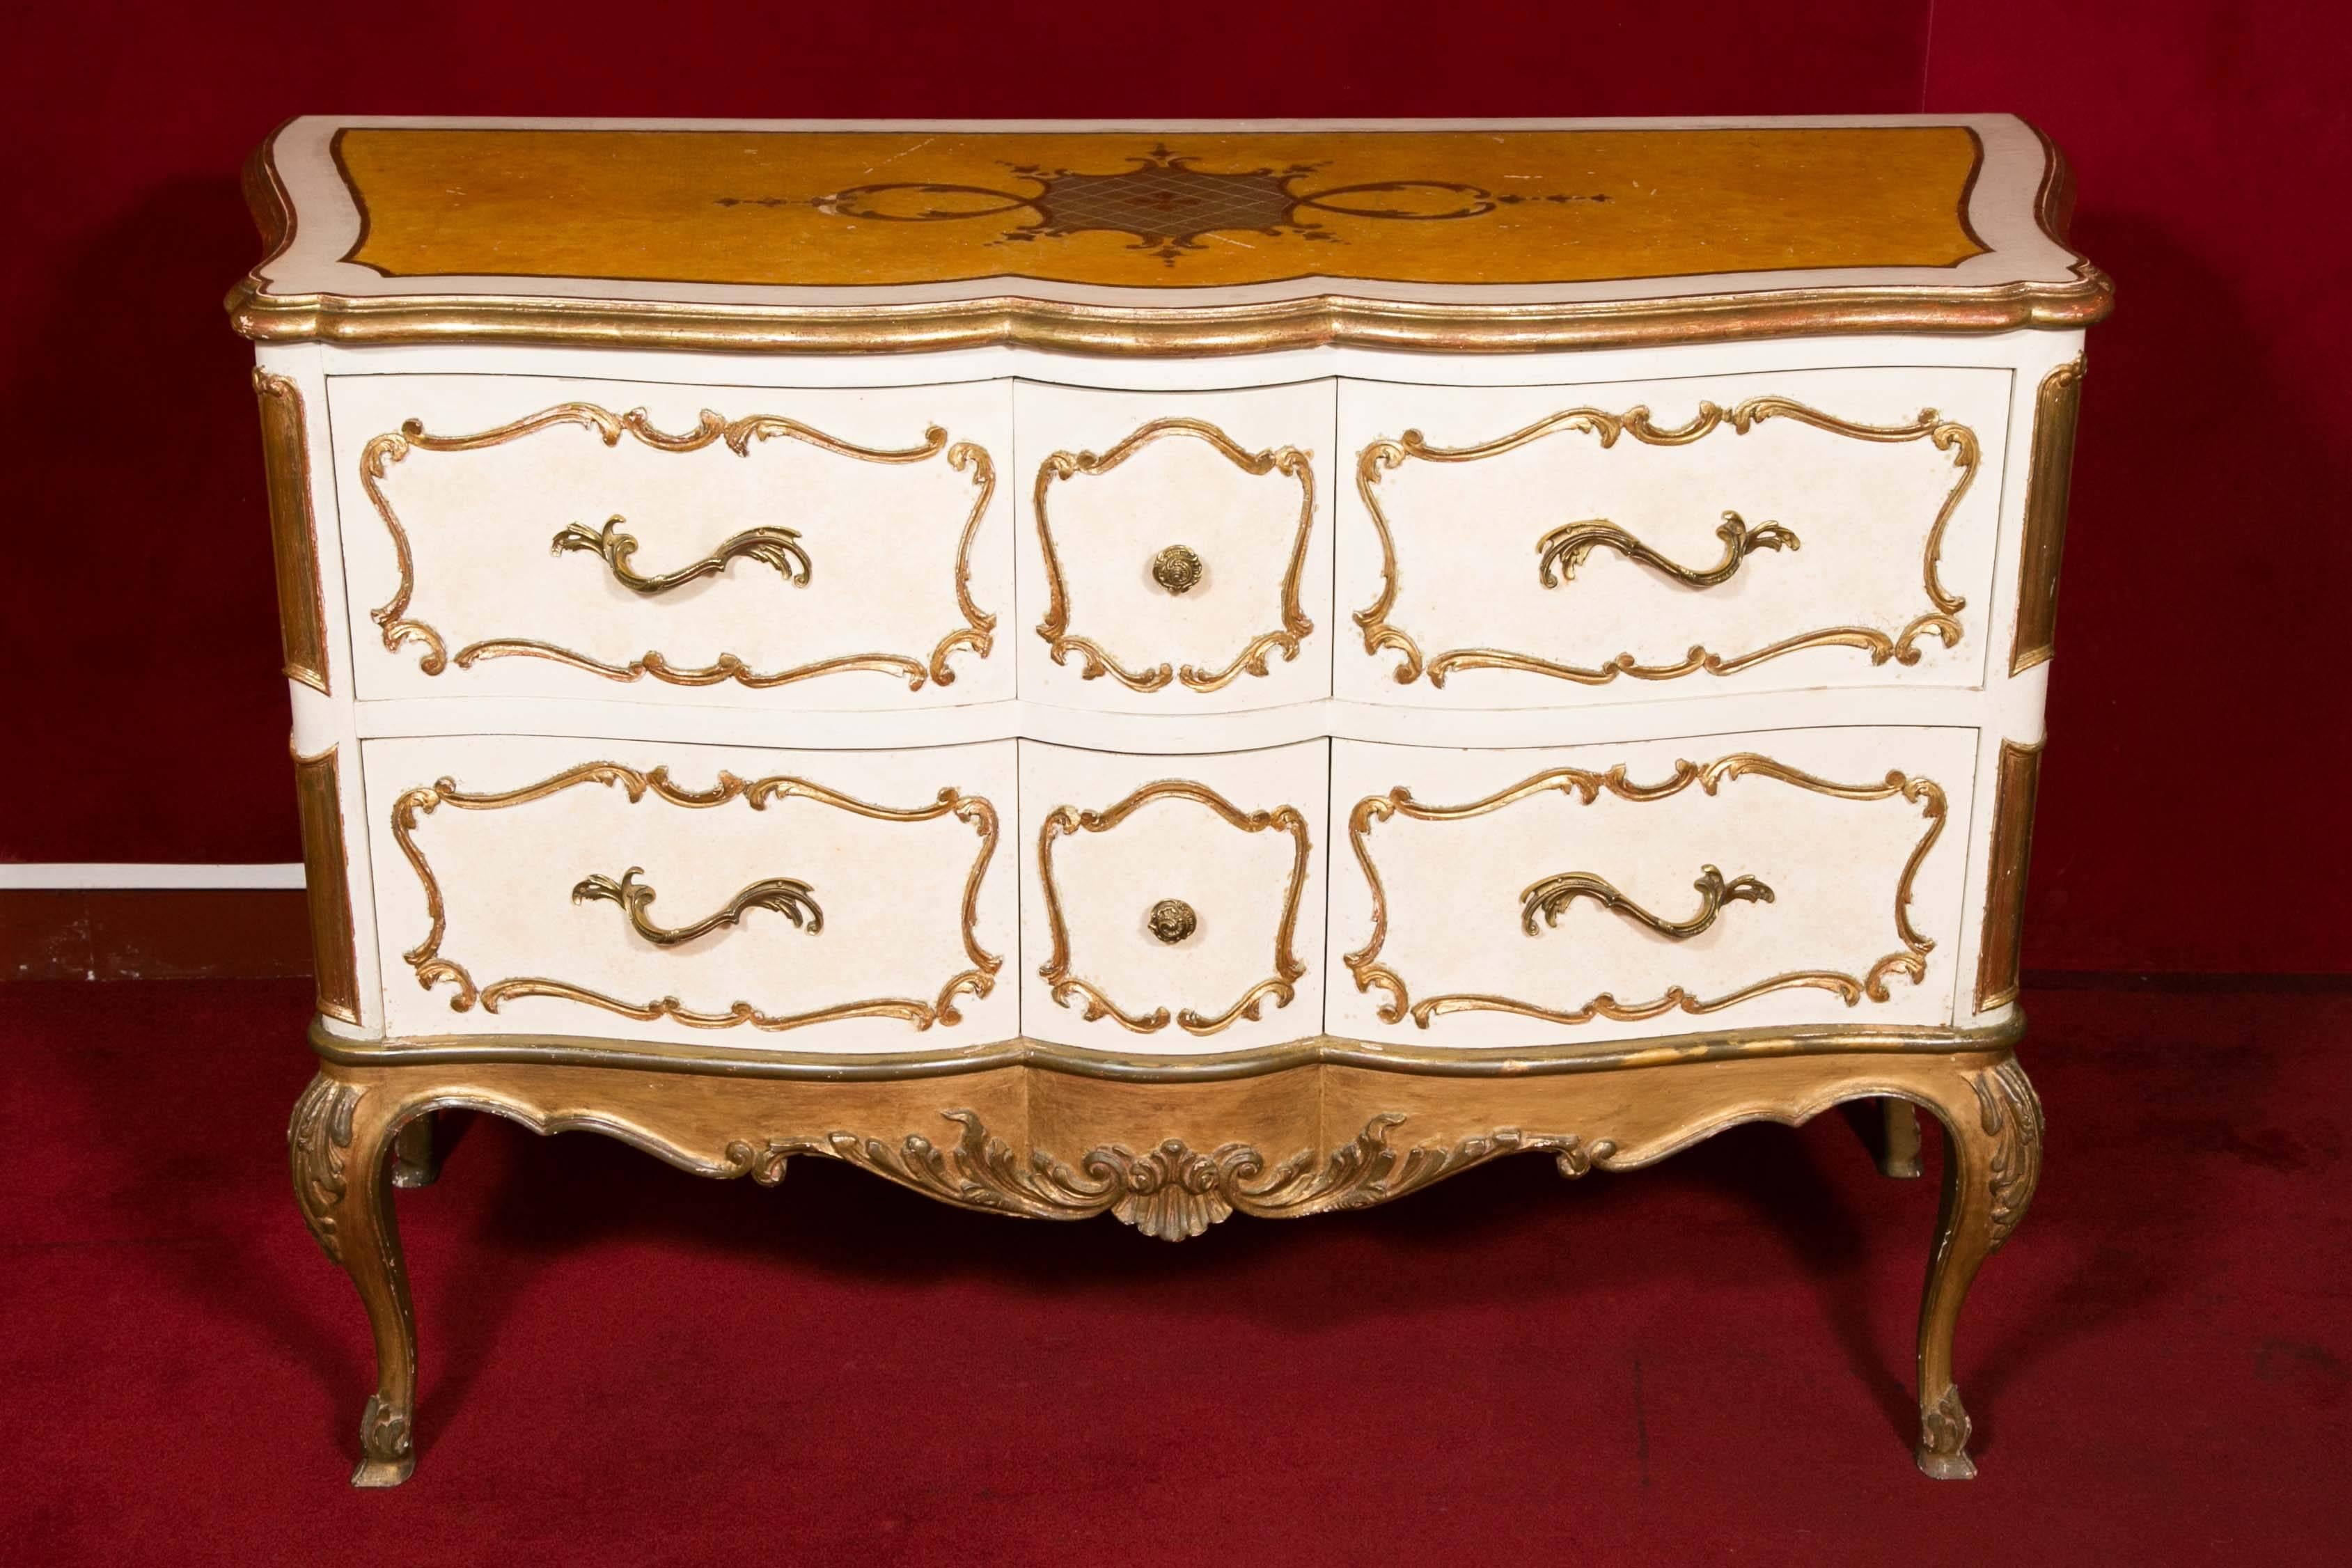 Beautiful Italian Commode from the 1950s, Painted and Gilded, very Well-Made.